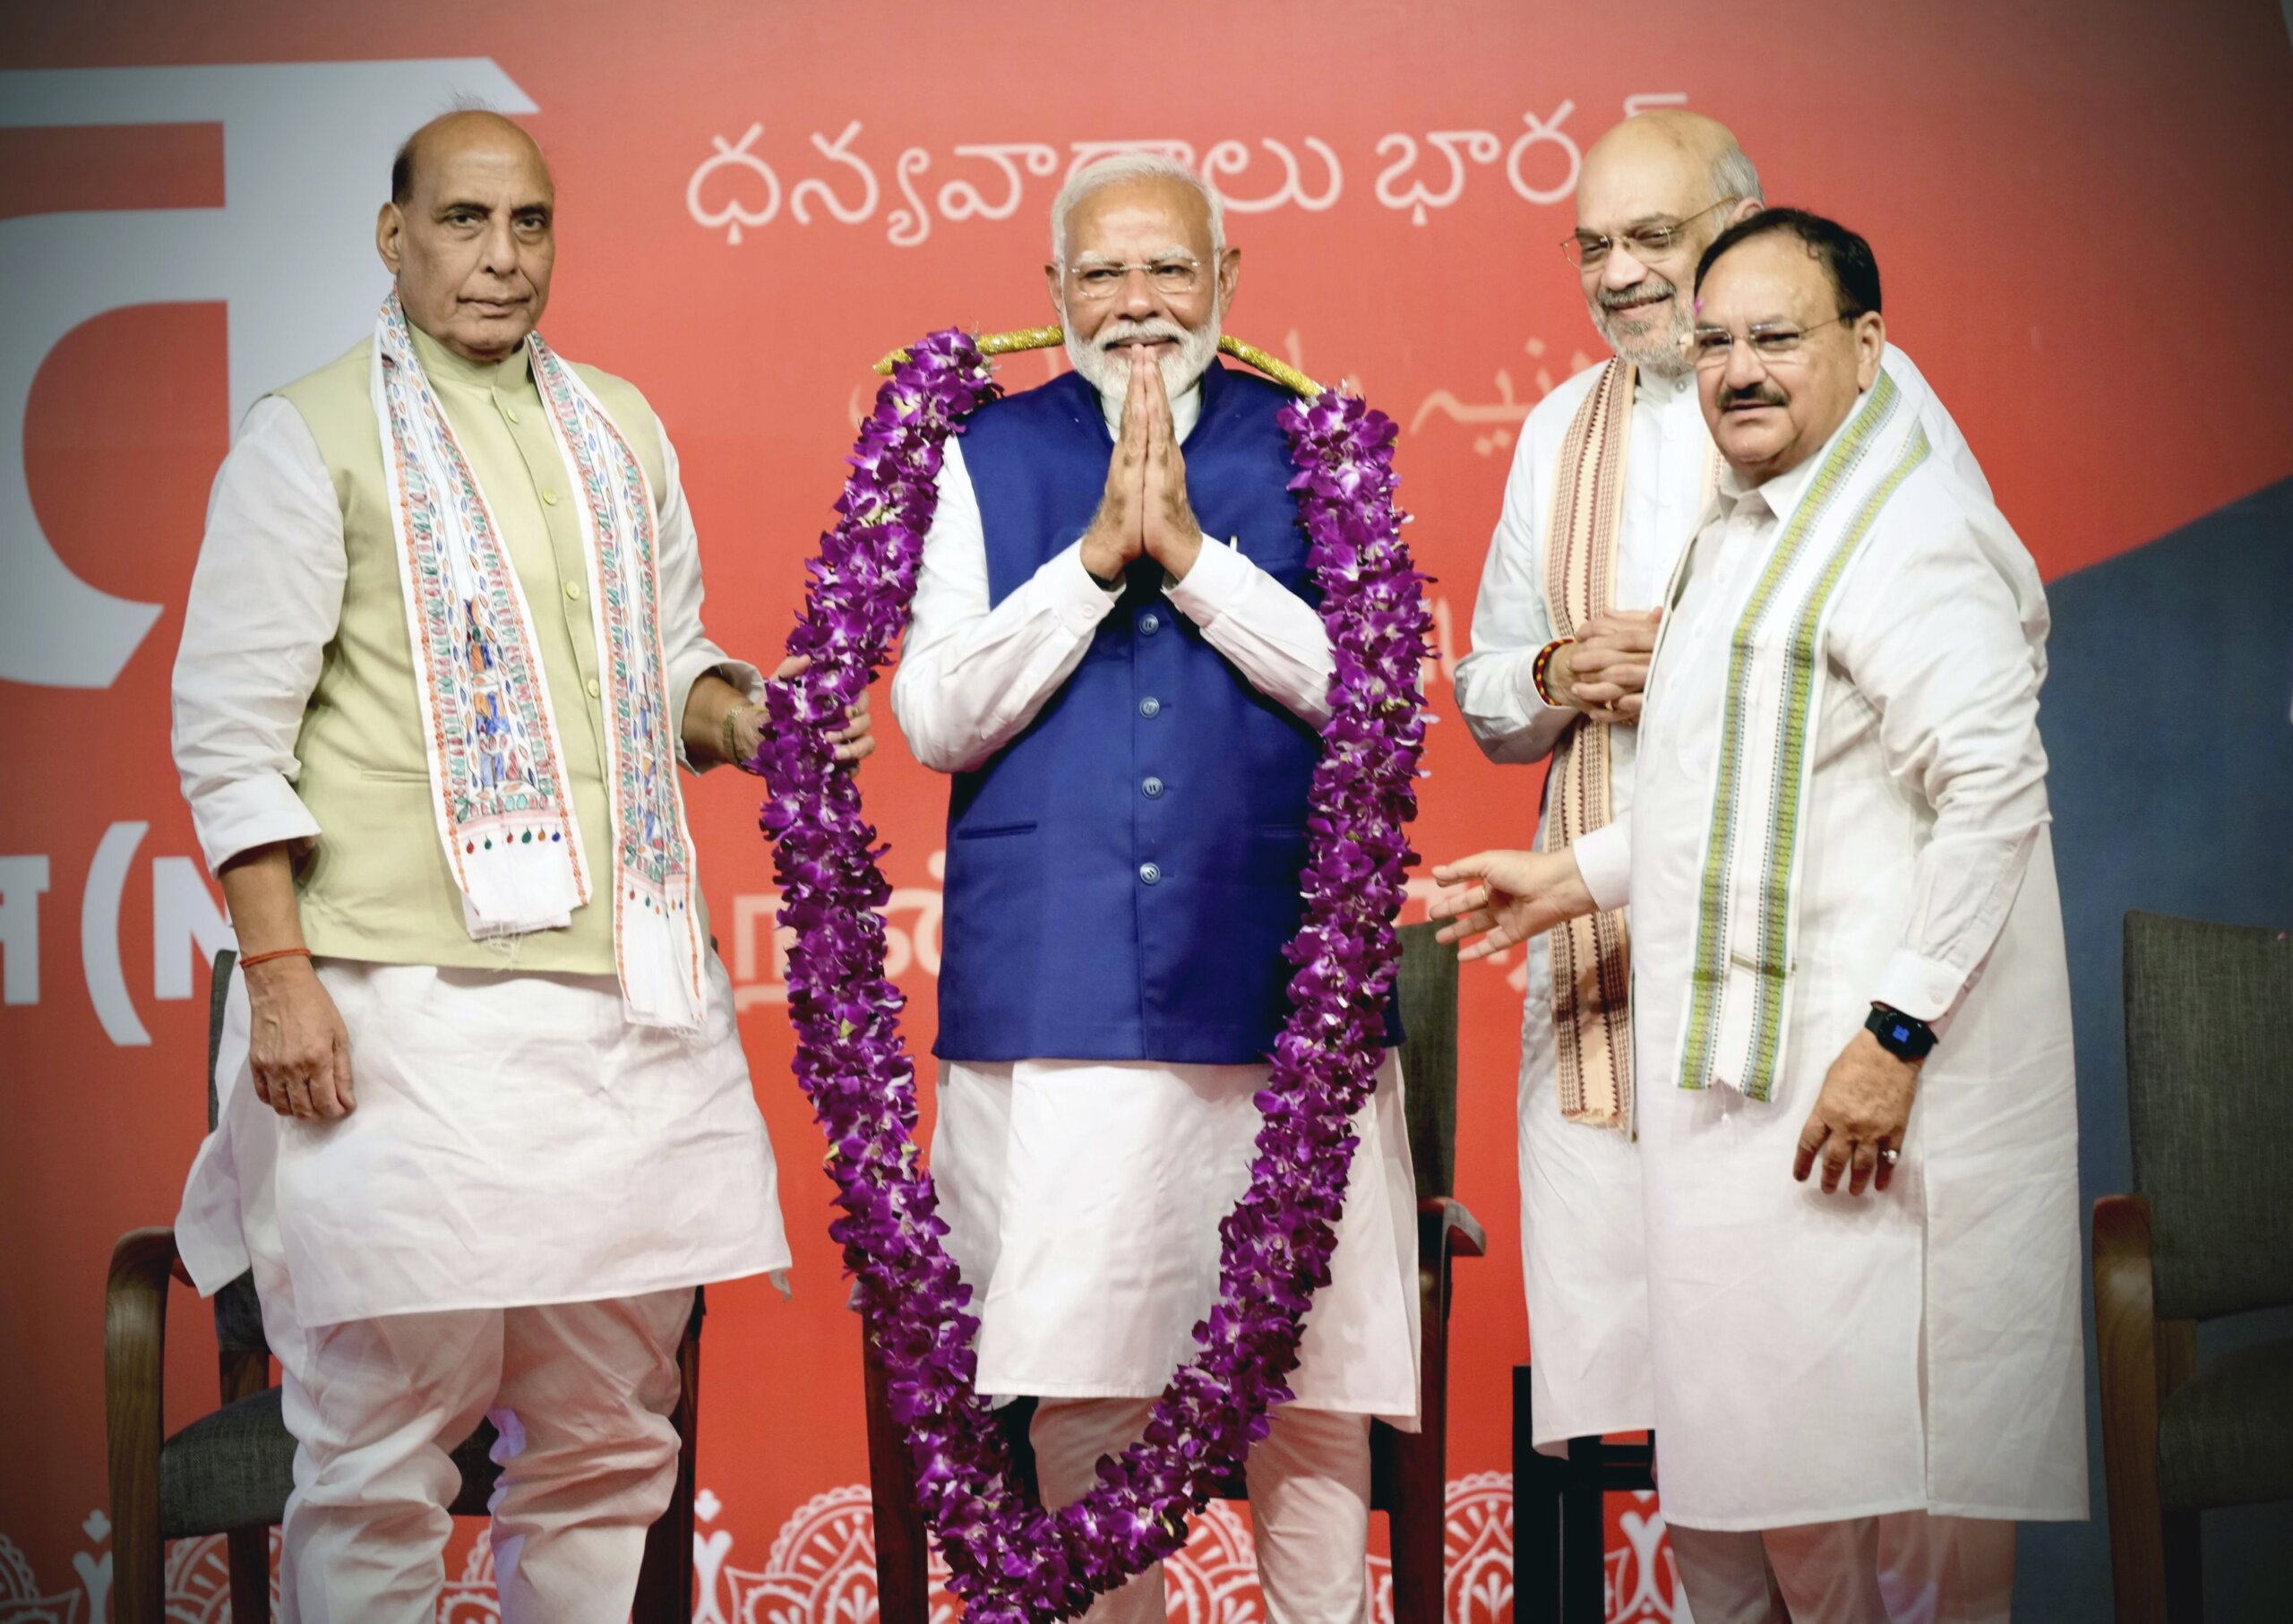 Narendra Modi’s third term as India’s prime minister may prove the most